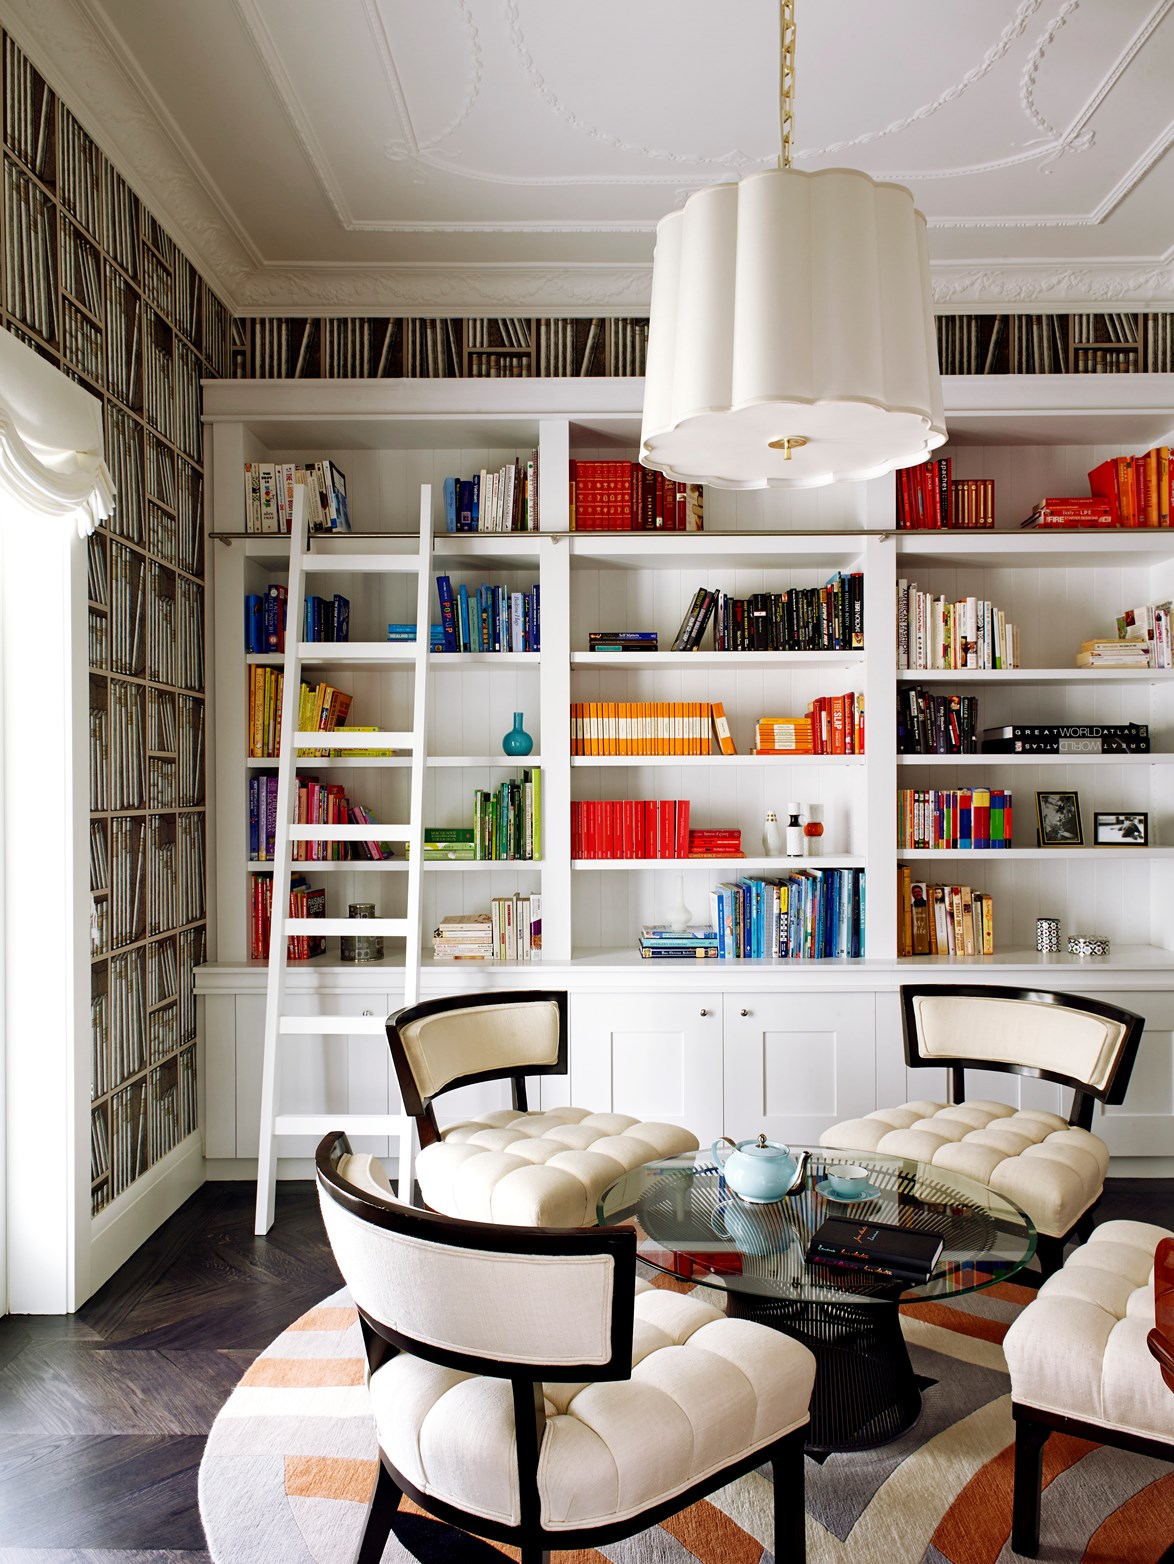 [Bookshelves](https://www.homestolove.com.au/10-bookshelves-in-australian-homes-5497|target="_blank") can be a common clutter culprit but not this beauty! Try colour-coding your books to make them a design feature rather than an eyesore. *Photo:* Anson Smart / *Belle*